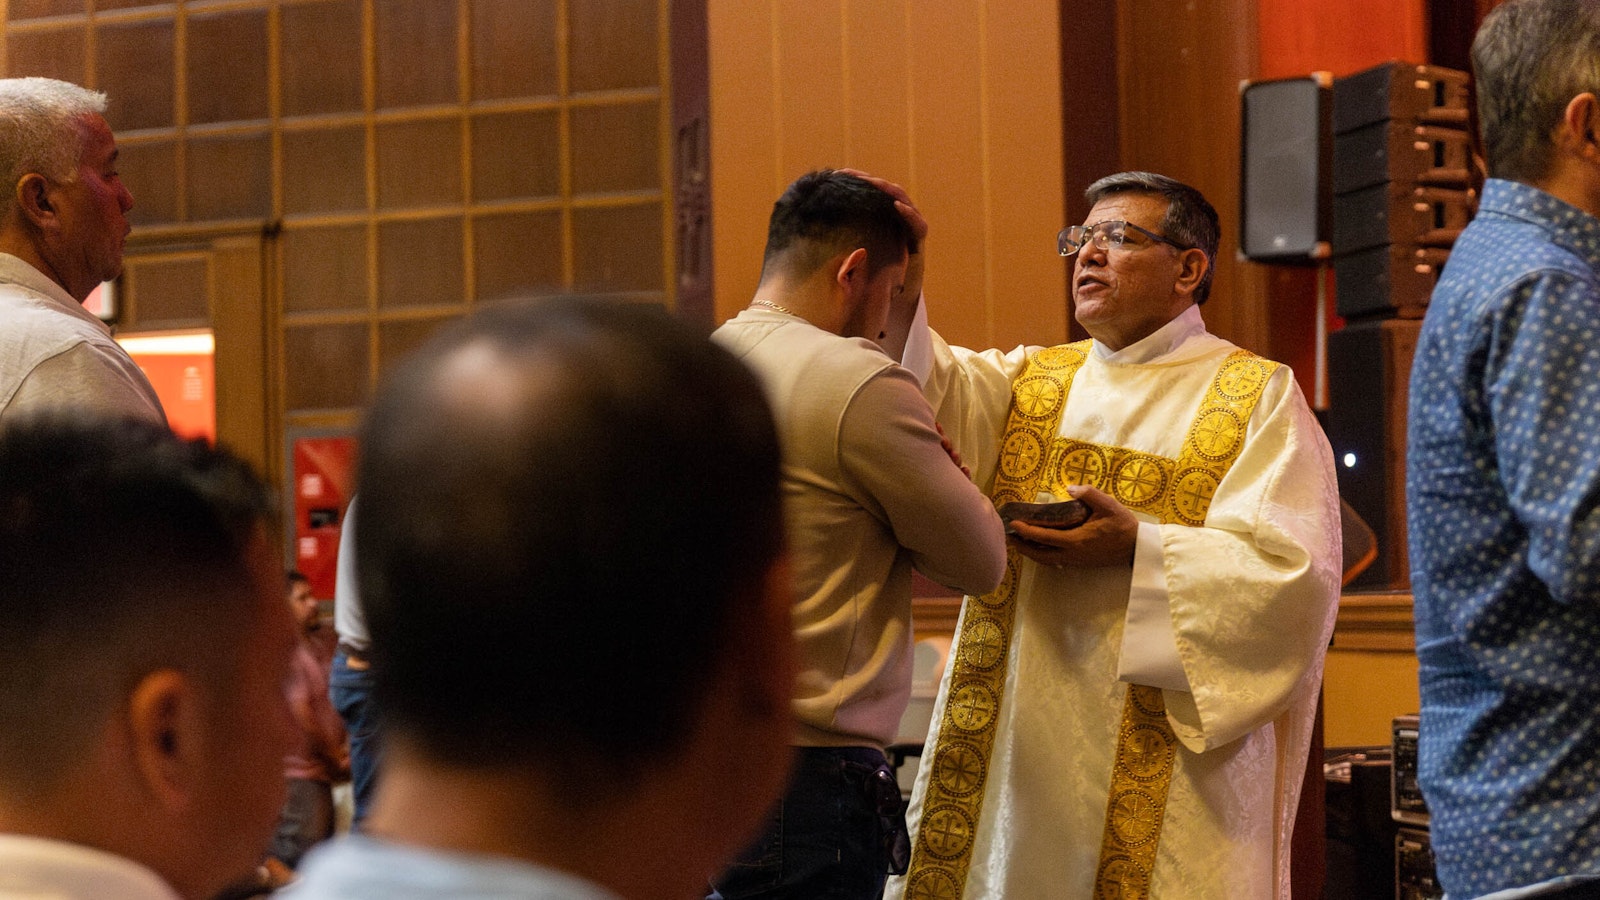 A man receives a blessing during Mass at the conference.